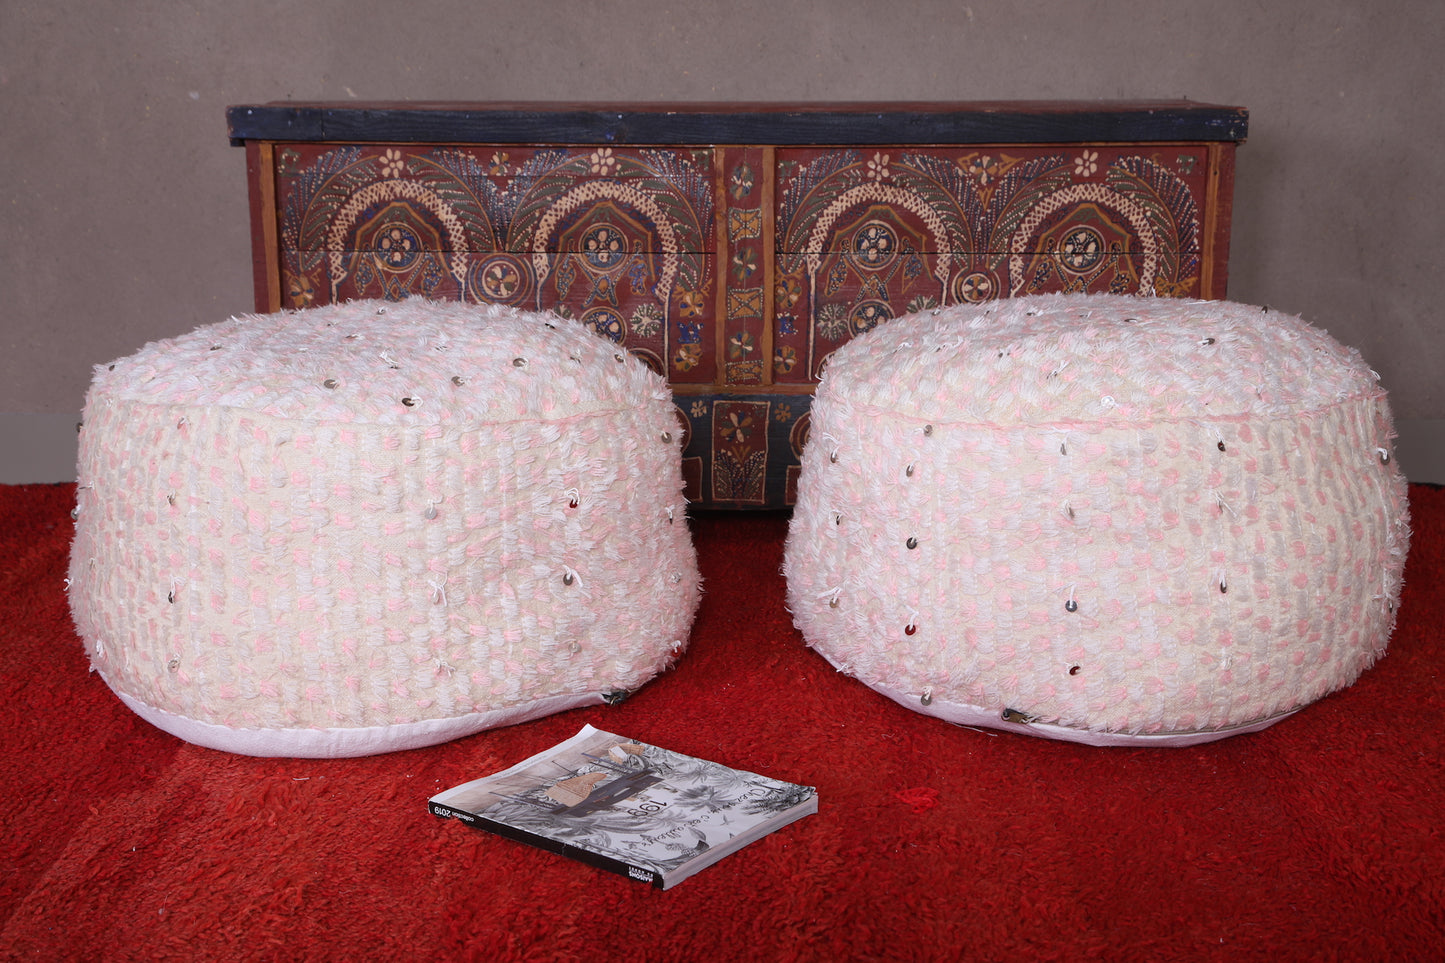 Two berber moroccan Round kilim old poufs